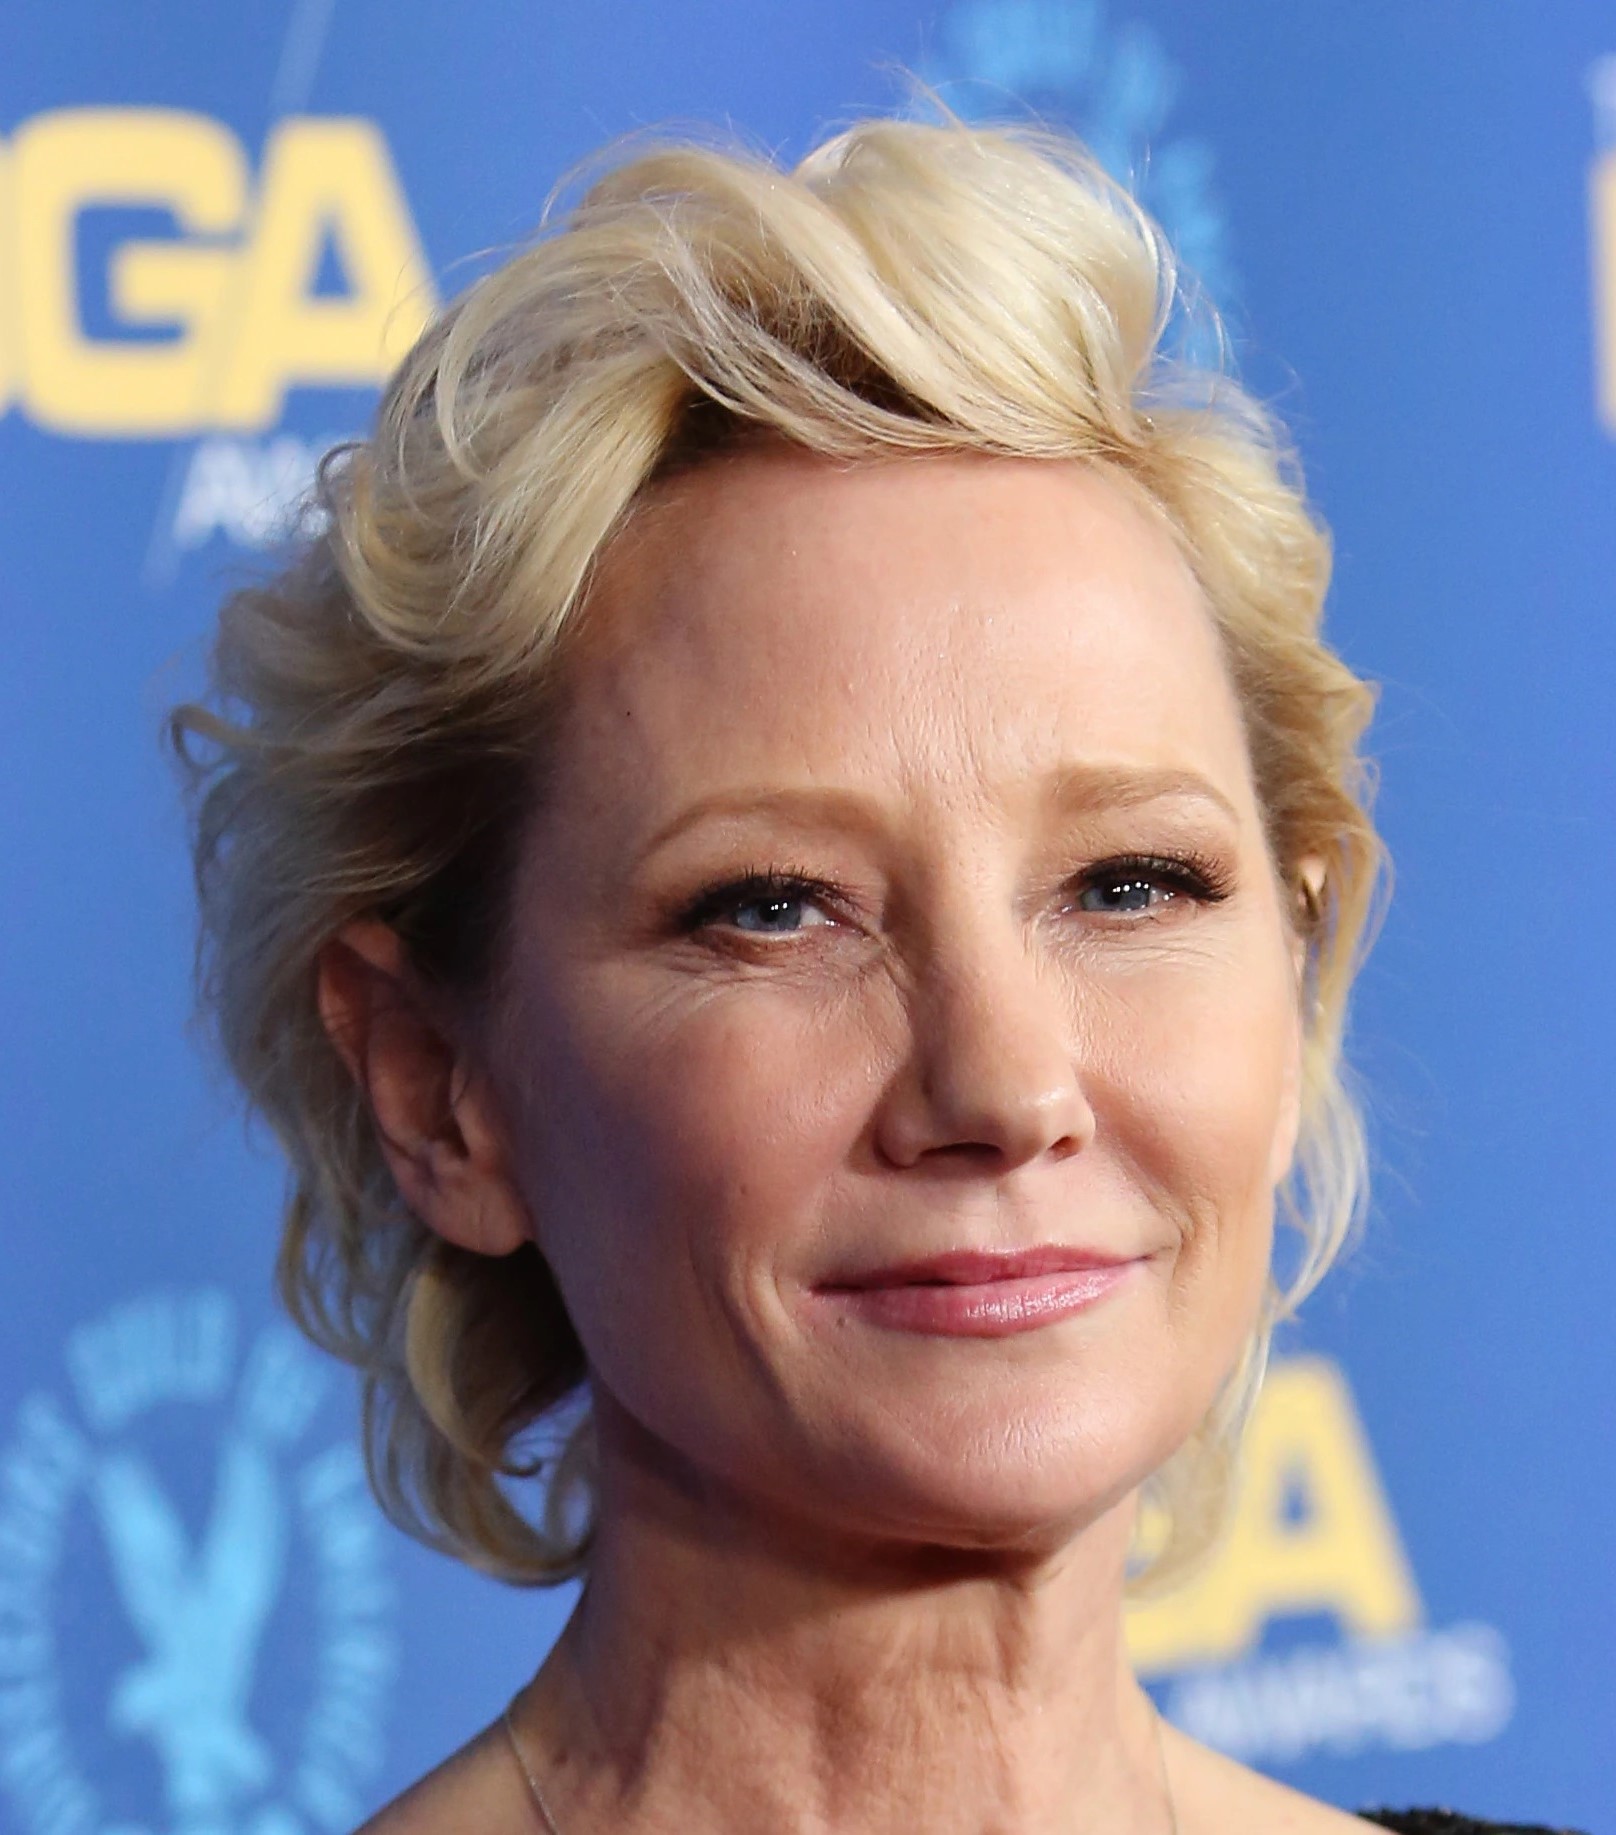 Is Anne Heche And James Tupper Married? Actress Met An Accident, Know About Couple And Their Kids